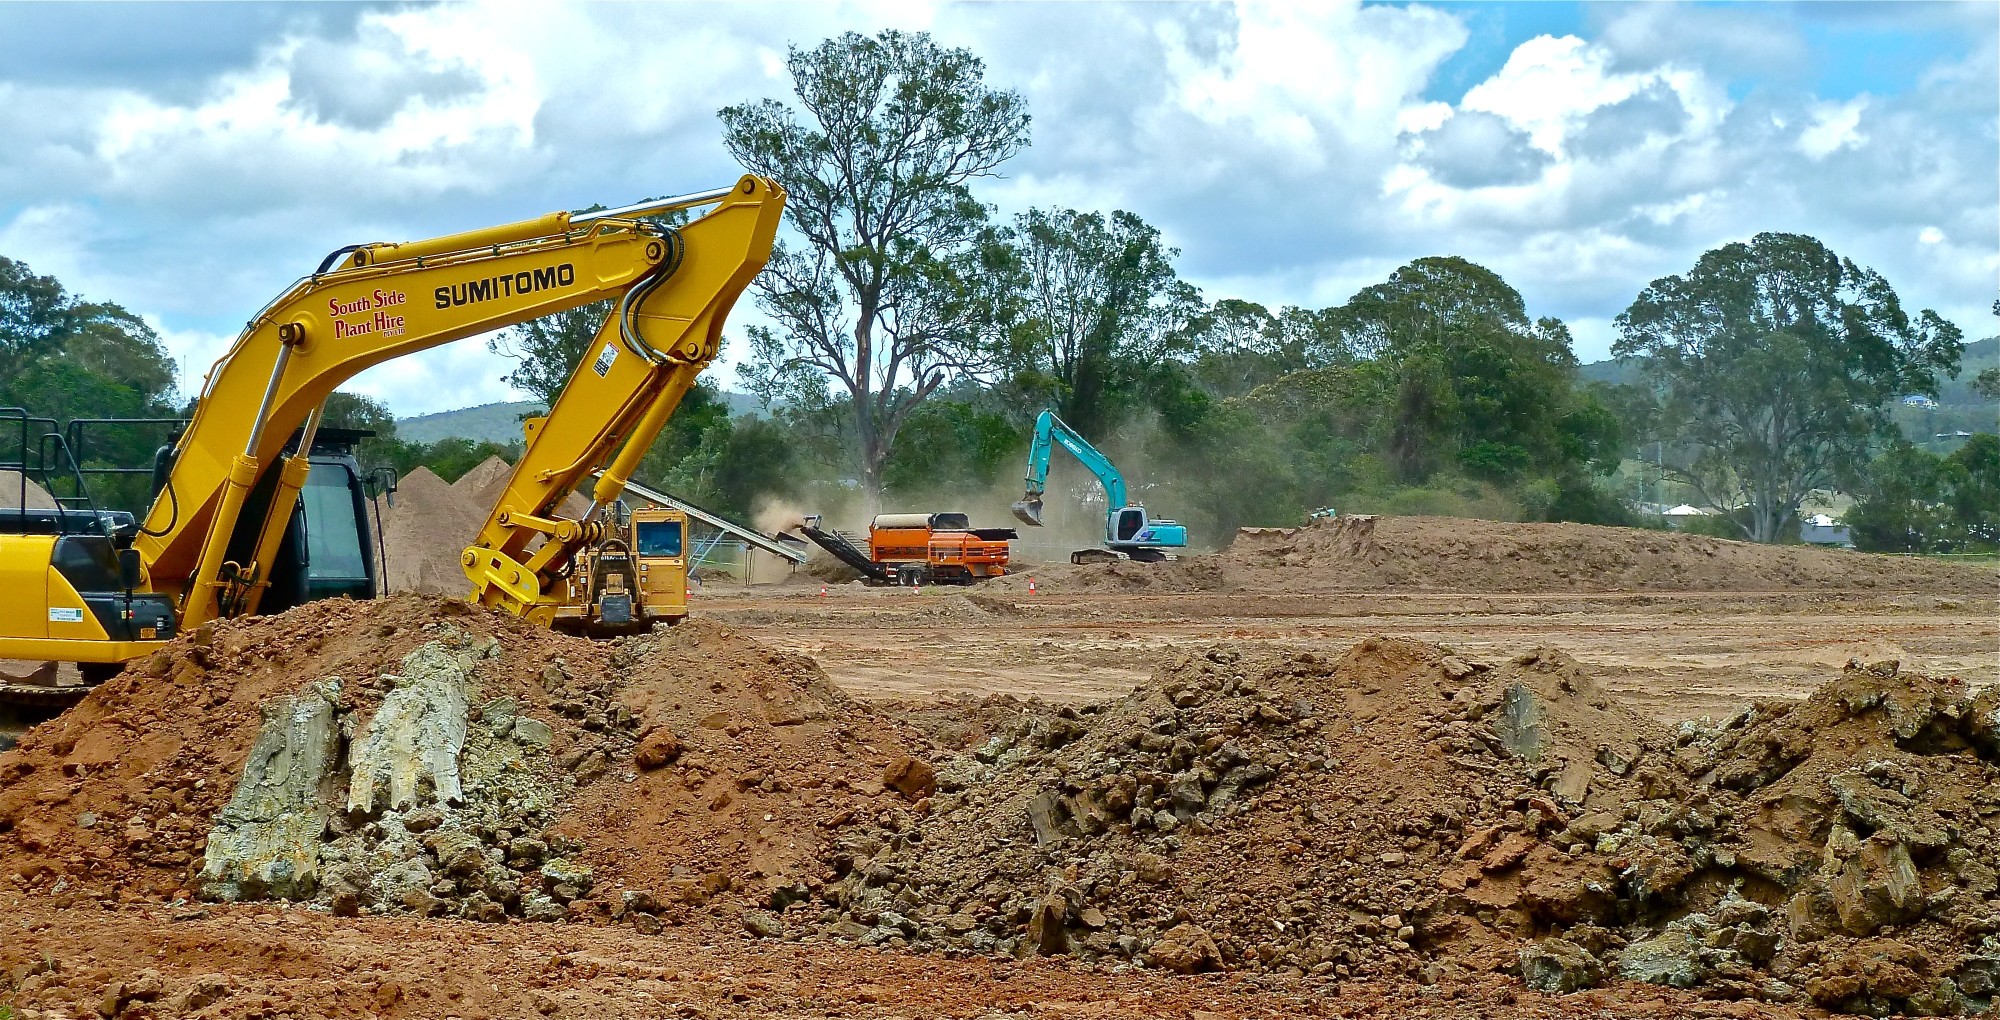 Premium Land Clearing: Excellence in Service